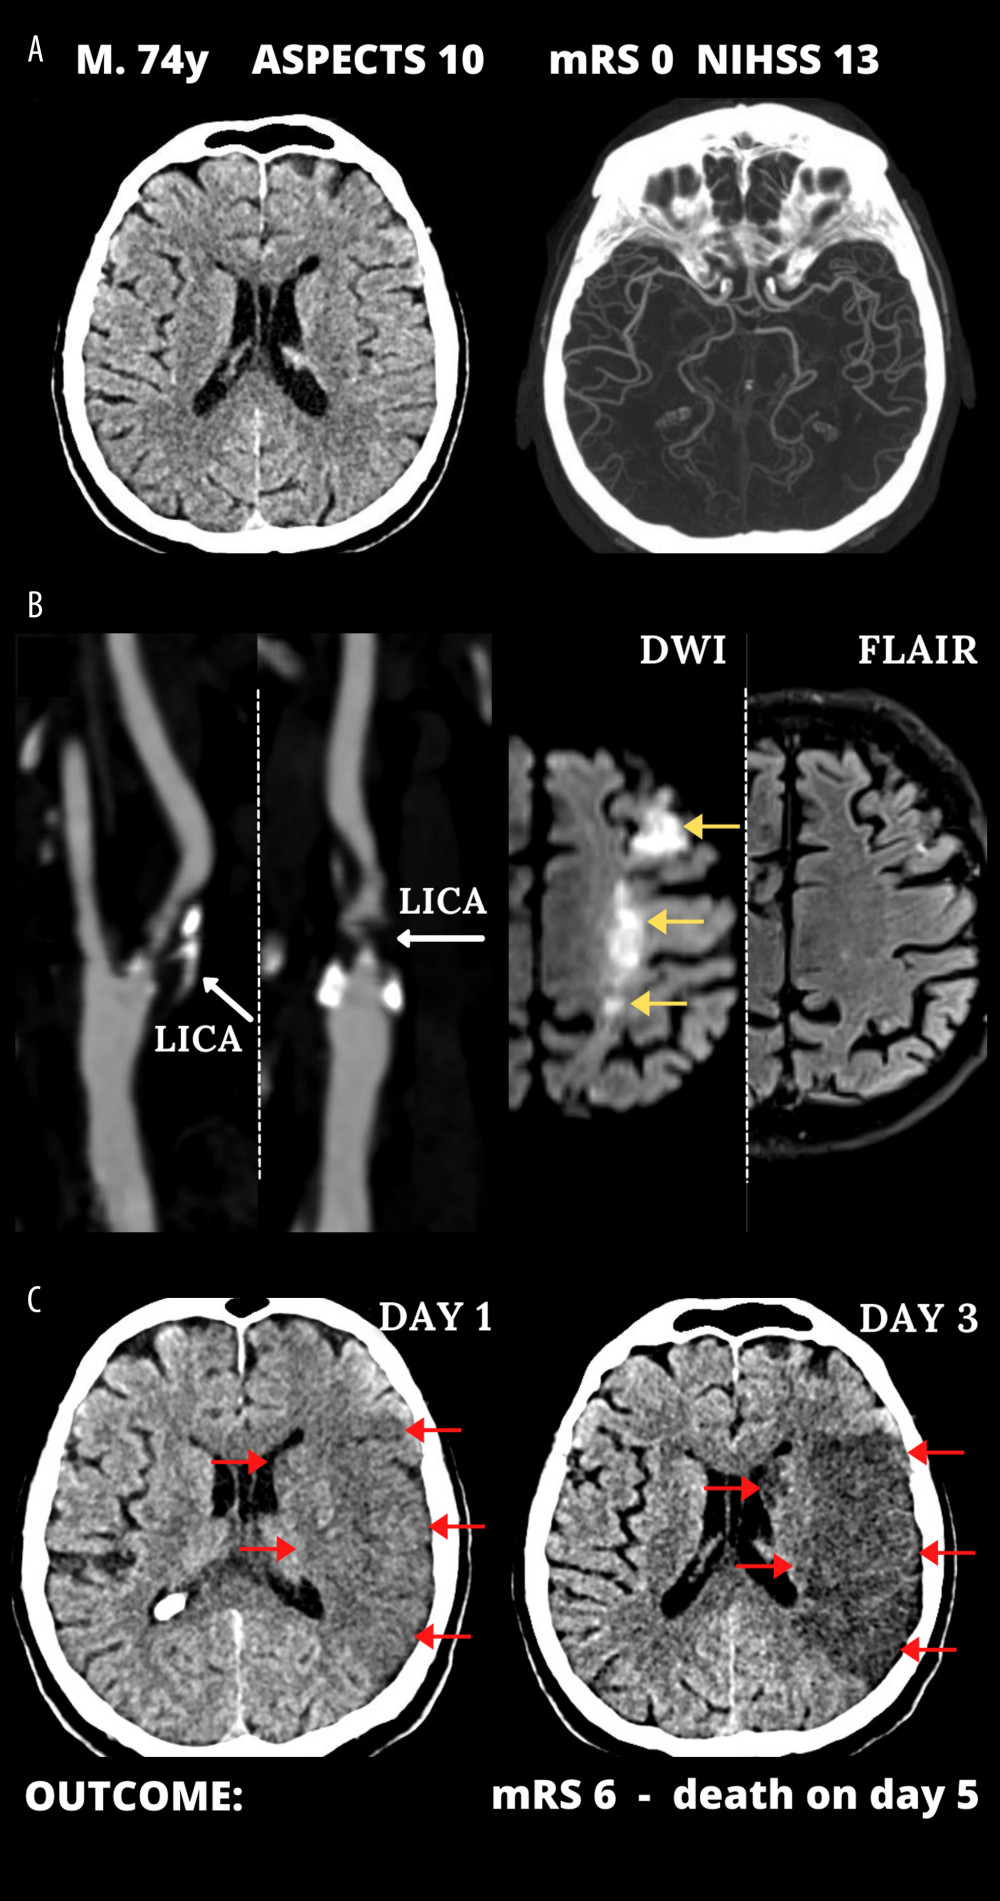 Typical cerebral infarct evolution in an acute ischemic stroke of the carotid artery origin in emergency mechanical reperfusion (EMR) eligible patient that did not receive EMR (EMR-untreated). (A) Admission cerebral computed tomography (day 0) was normal; Alberta Stroke Program Early Computed Tomography Score (ASPECTS) 10 in a man presenting with left hemispheric stroke symptoms of increasing severity National Institutes of Health Stroke Scale (NIHSS) – 13 (left) and computed tomography angiography showed no intracranial artery occlusion and good collaterals (Tan 3) (right). (B) Sub-occlusive left internal carotid artery (LICA) stenosis (left); magnetic resonance imaging demonstrated potentially reversible hyperacute left-sided diffusion restriction on diffusion-weighted imaging (DWI, yellow arrows) which are absent on the fluid-attenuated inversion recovery (FLAIR) sequence (right). IV thrombolysis was started, and the patient was observed for thrombolysis effect; there was no referral for EMR. Neurologic status gradually deteriorated. (C) Large cerebral tissue loss (red arrows) seen on control computed tomography 12 hours after 1st scan (left, thrombolysis ineffective, collateral supply exhaustion) and on day 3 (right). Figure was created with the use of Canva (Perth, Australia).